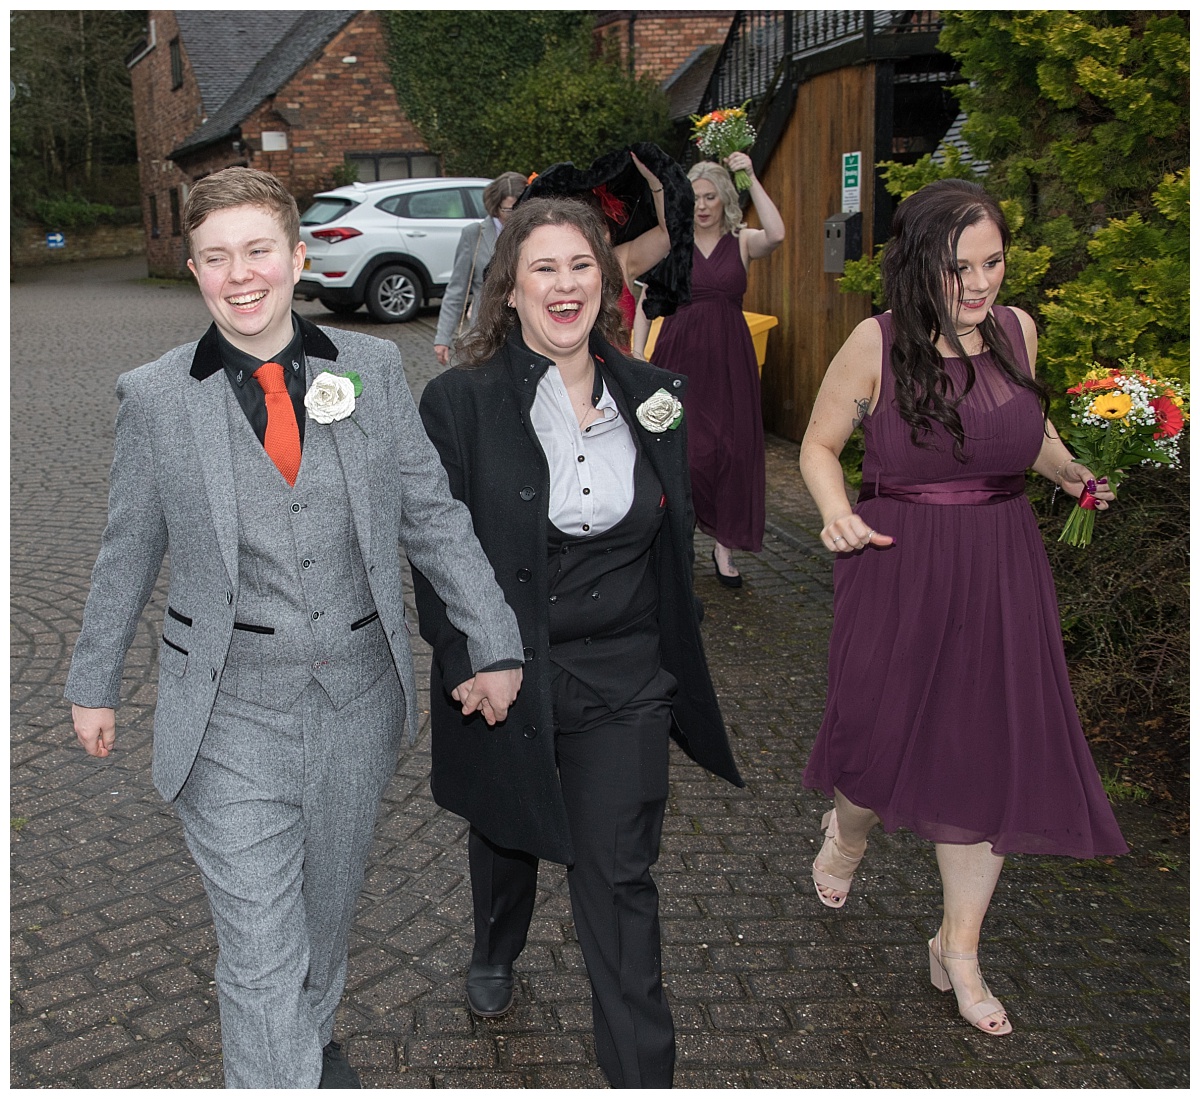 Wedding Photography Manchester - Lois and Louise's Moddershall Oaks Country Spa Retreat wedding day 45